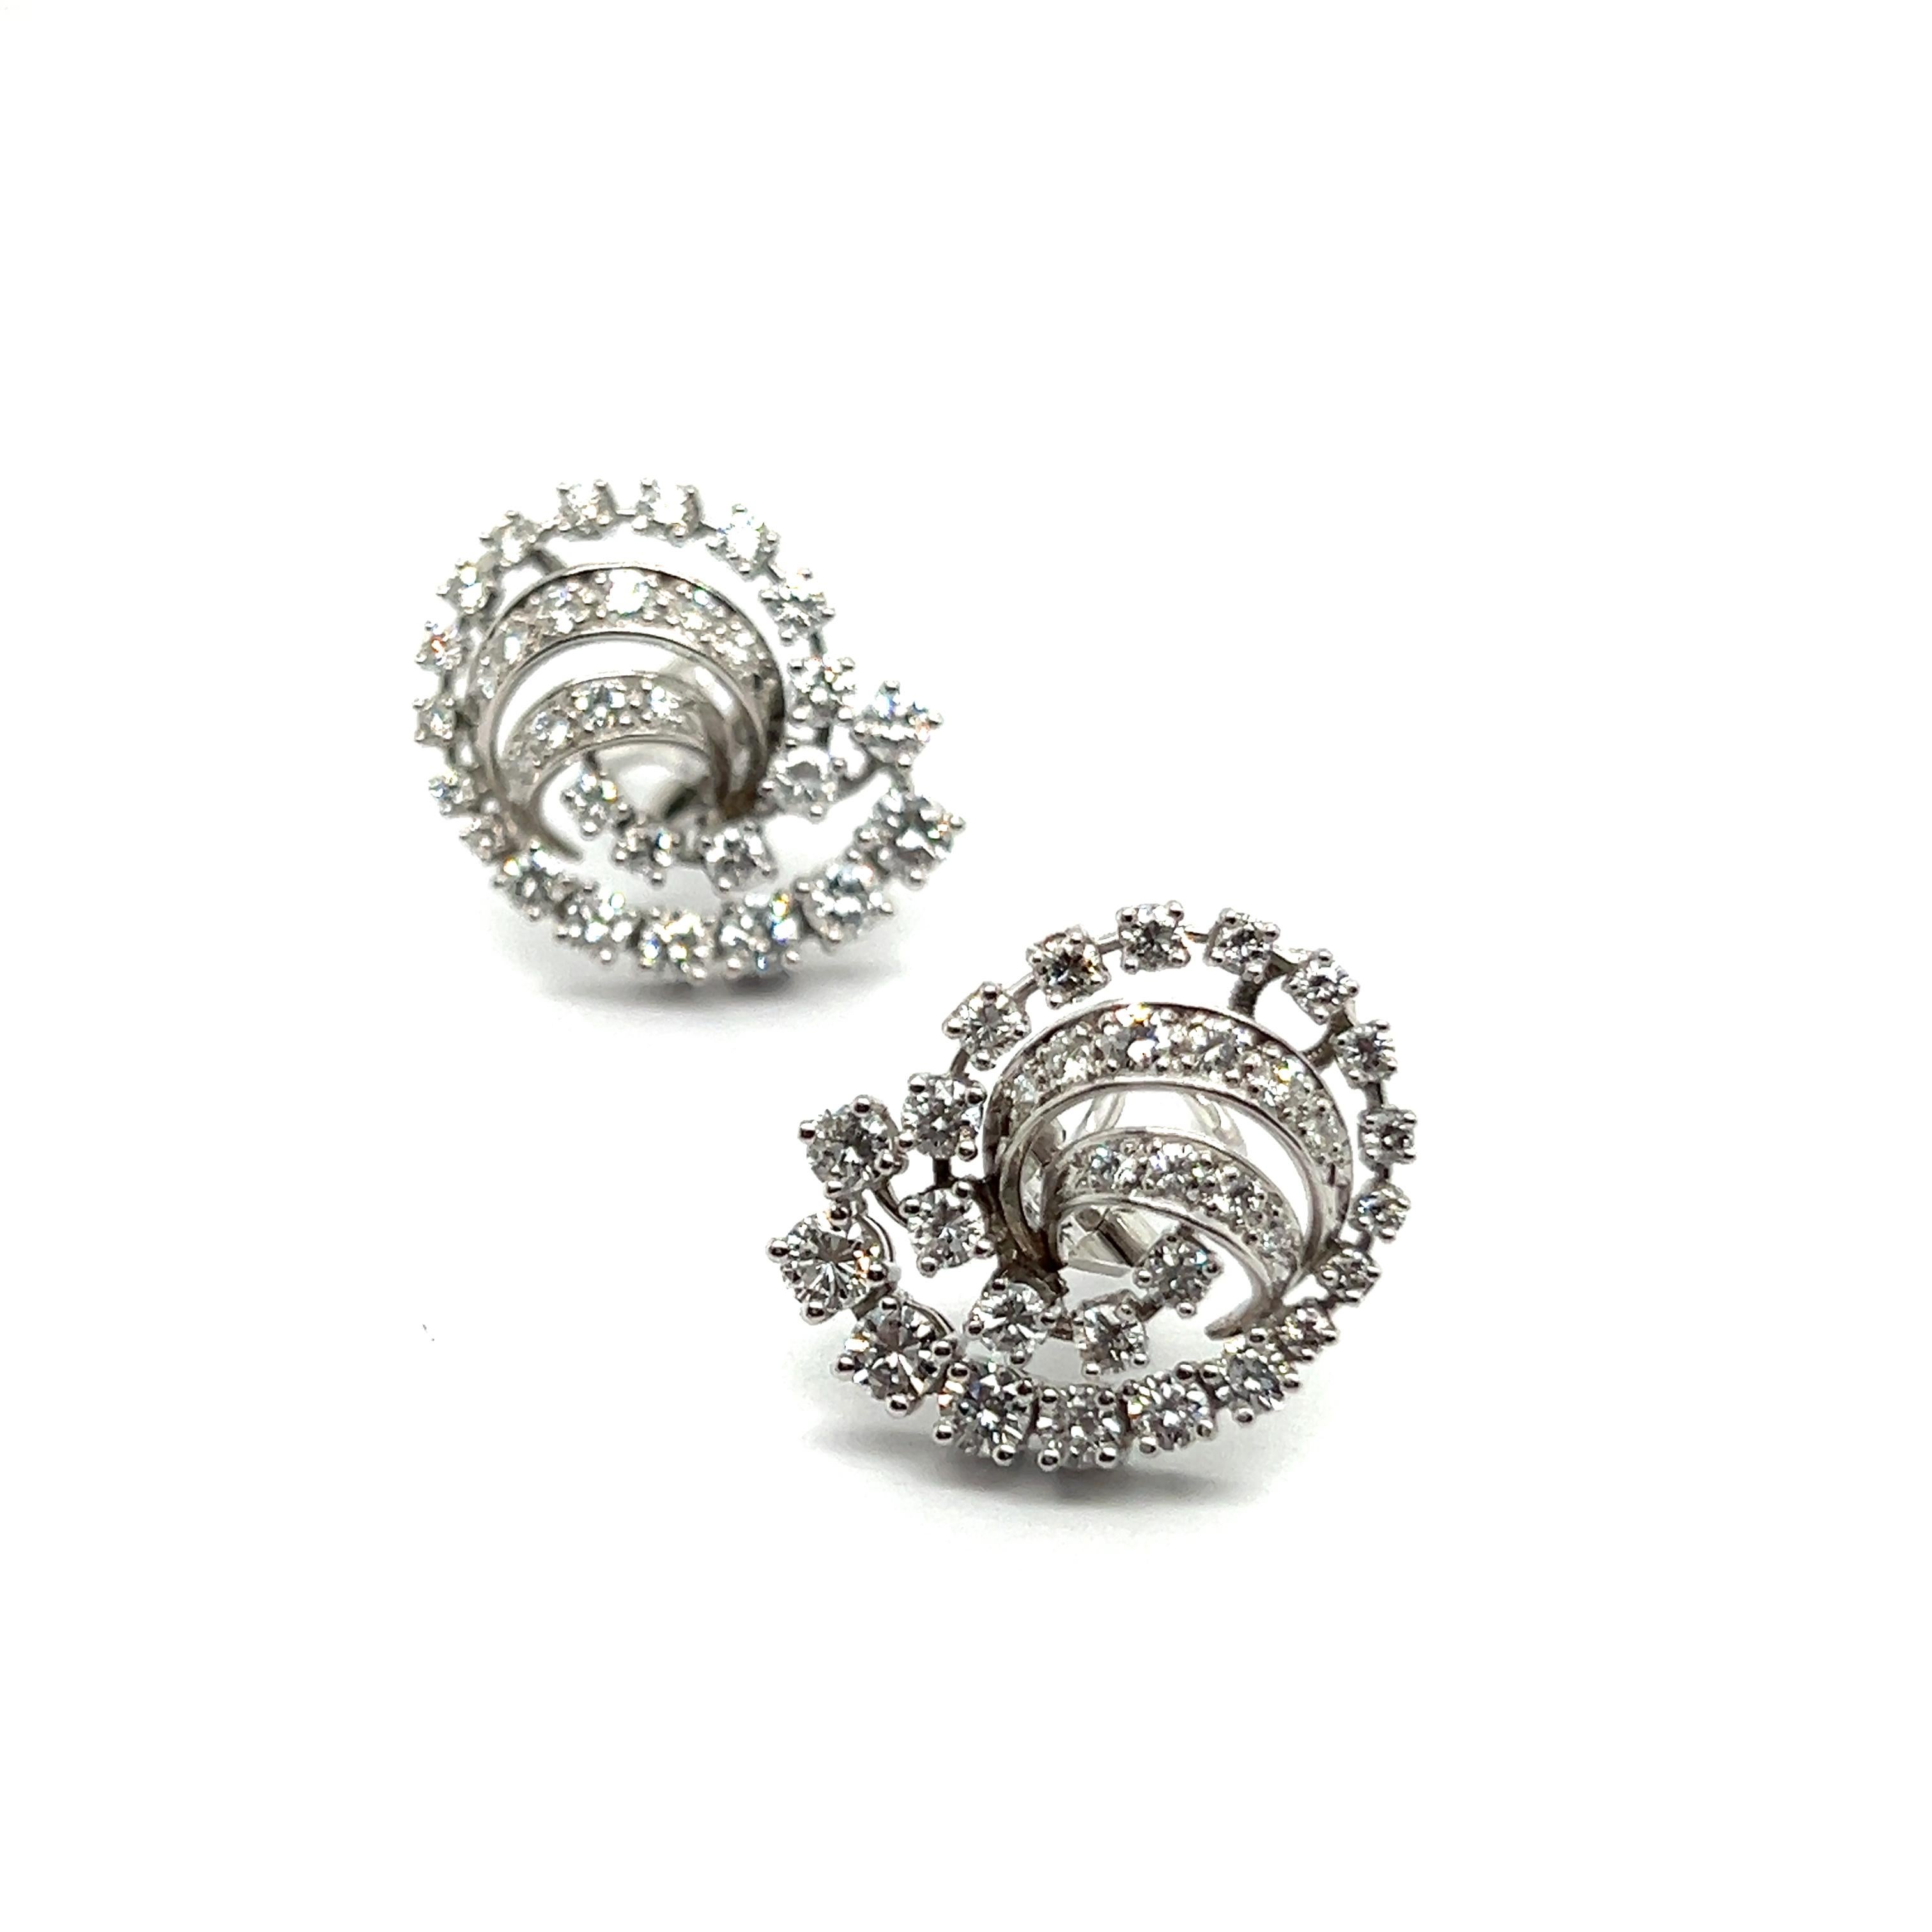 Adorn yourself with celestial elegance in these divine earrings. Crafted in 18 Karat white gold, they boast a mesmerizing swirl of 64 brilliant-cut diamonds, totaling 2.00 carat. Each stone of G-H color and vs clarity sparkles like the brightest